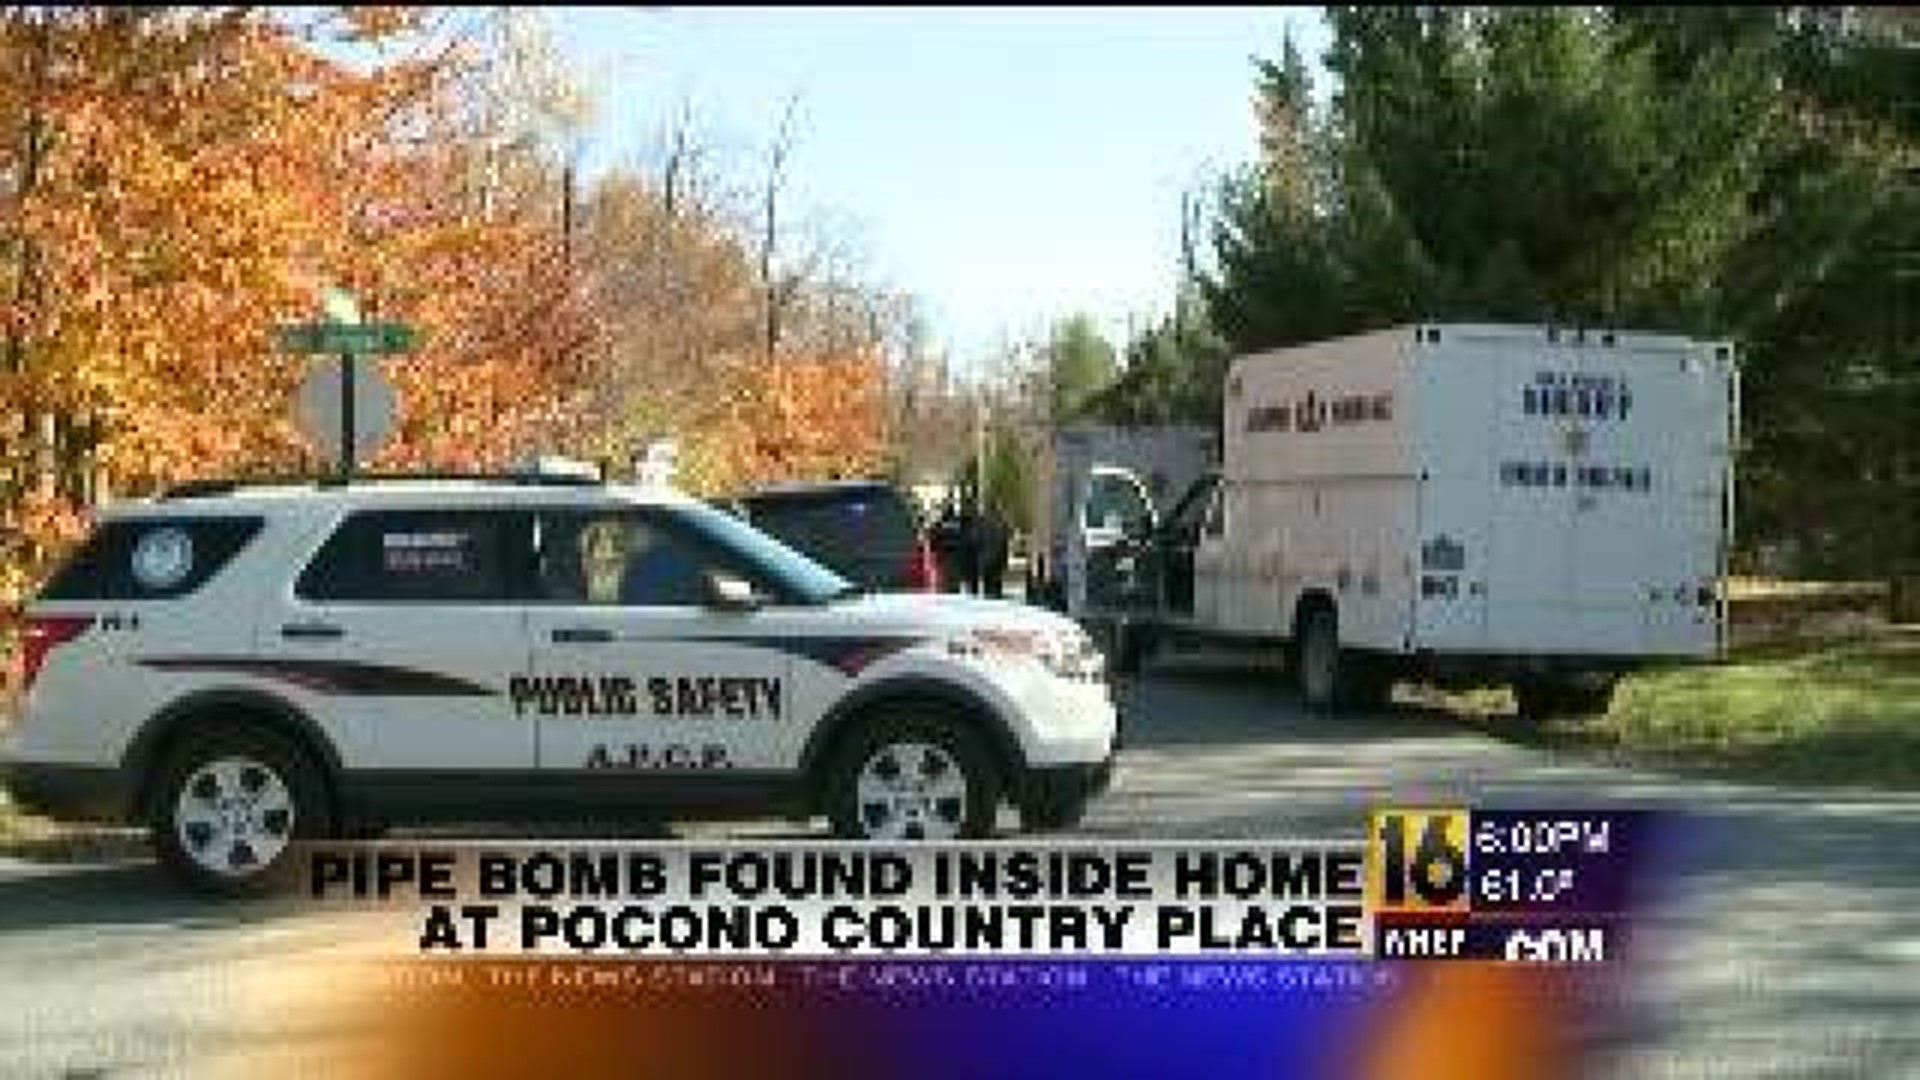 Pipe Bomb Found Inside Home